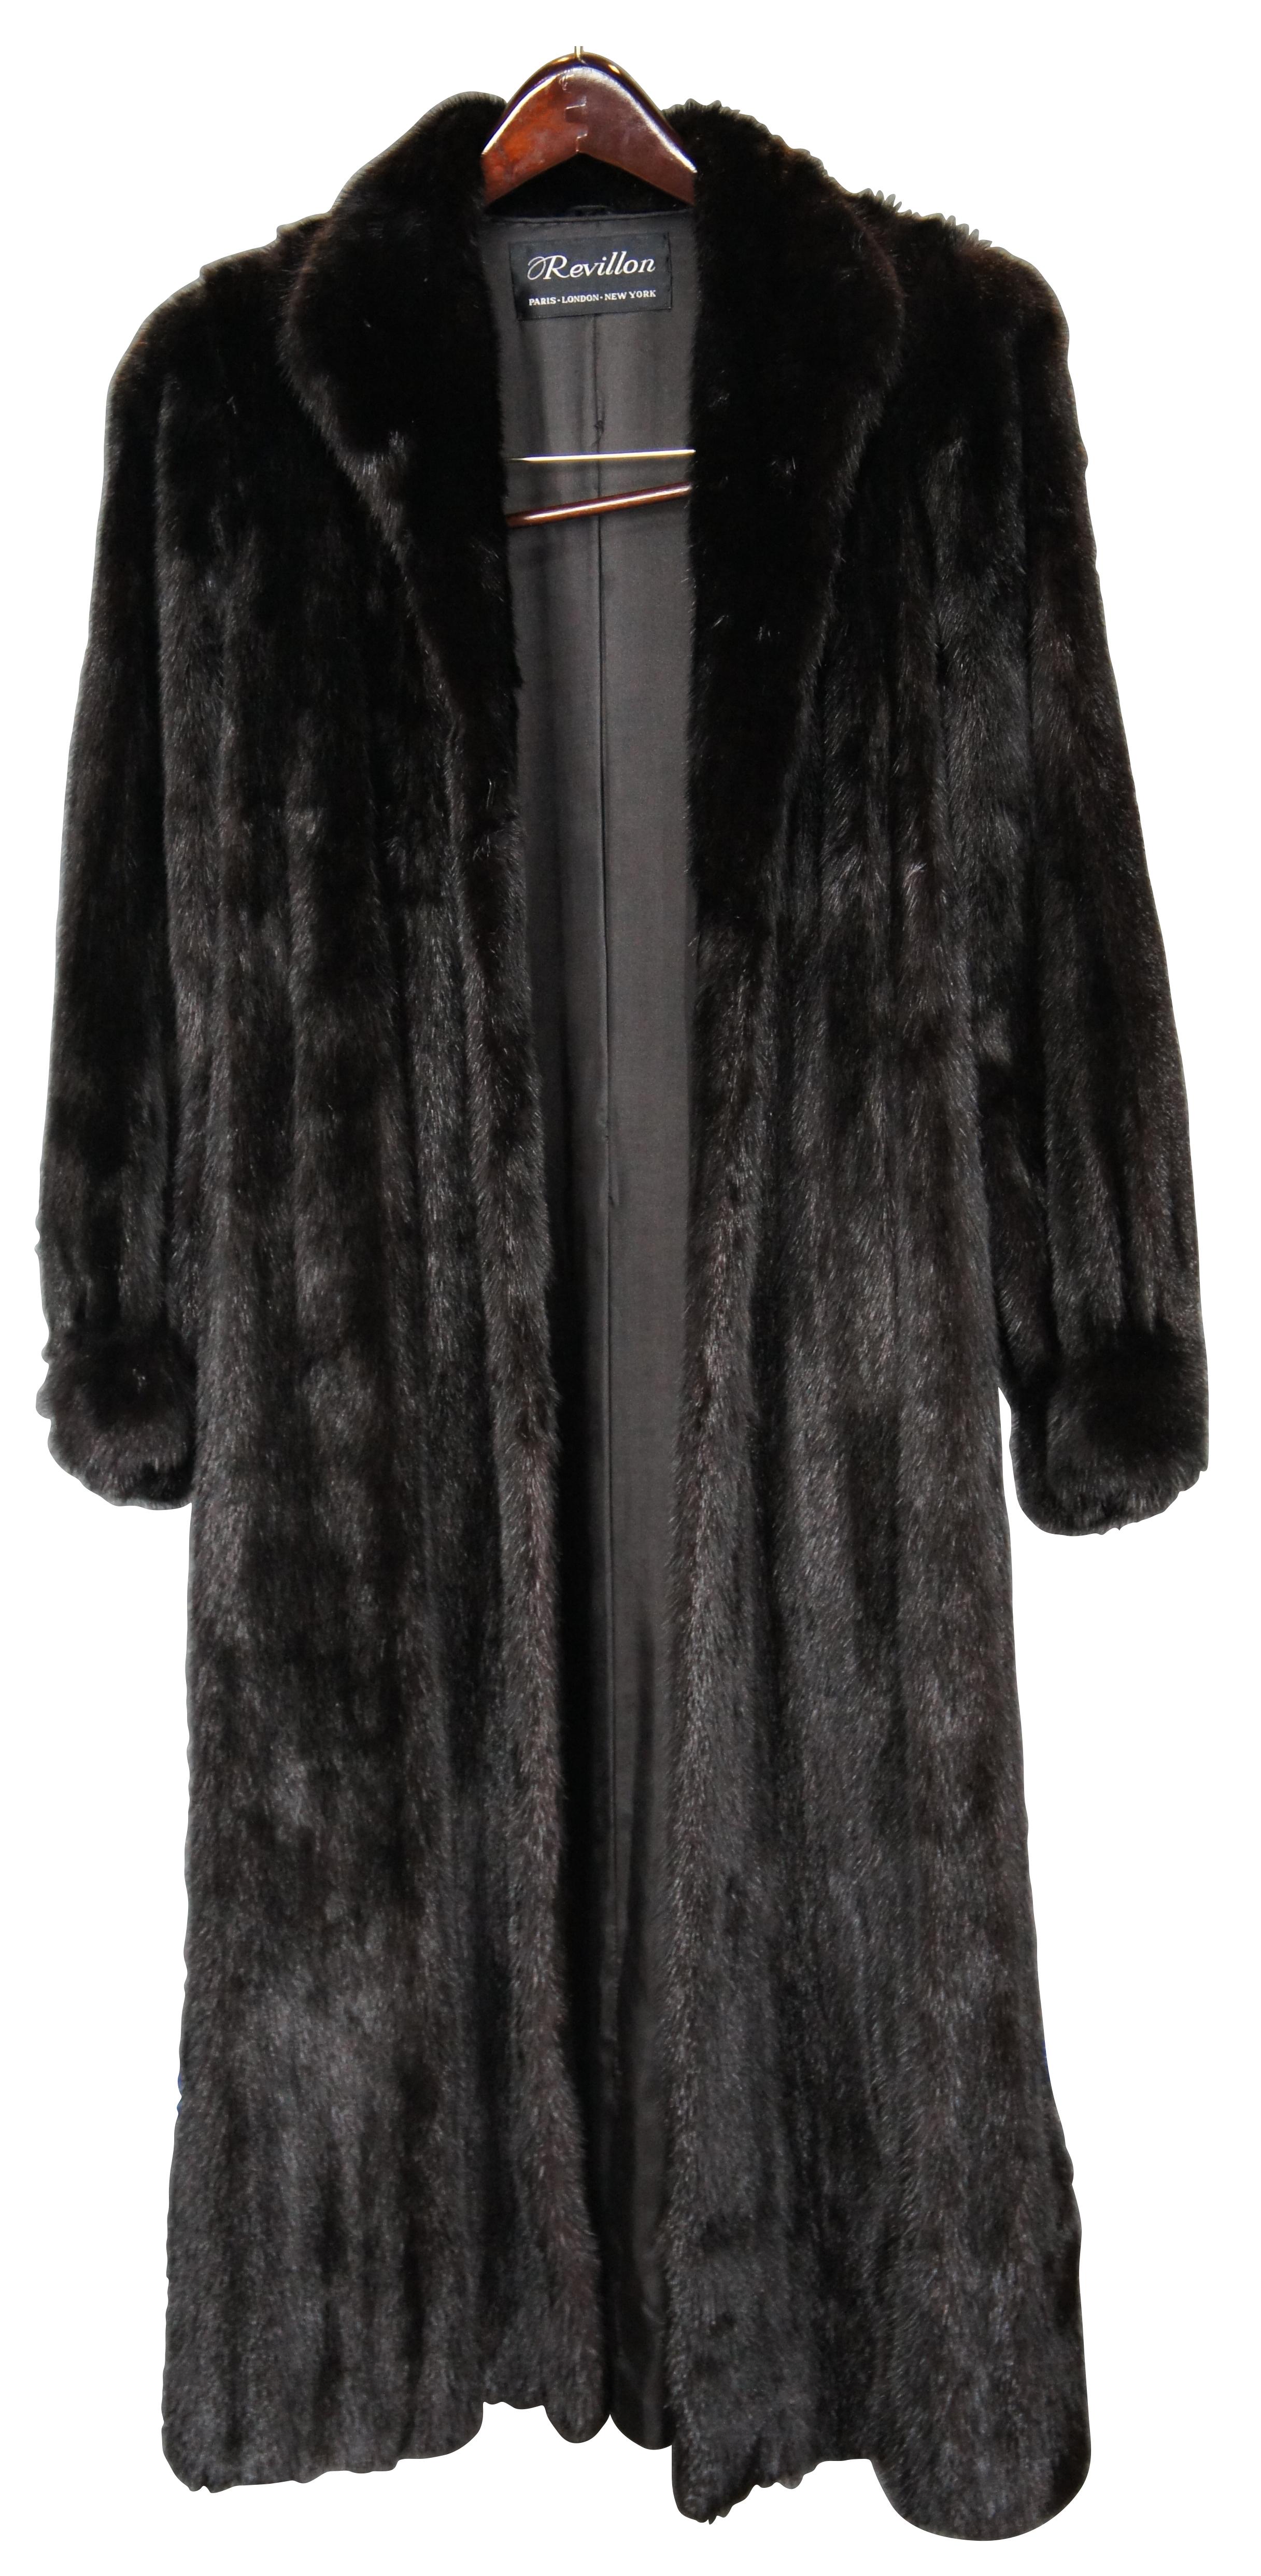 Vintage black mink coat by Revillon, full length with swivel hook and loop closure, two velvet lined side pockets, and decorative marbled buttons at the cuffs. Lining personalized with the initials BZS. Owner was 5'3